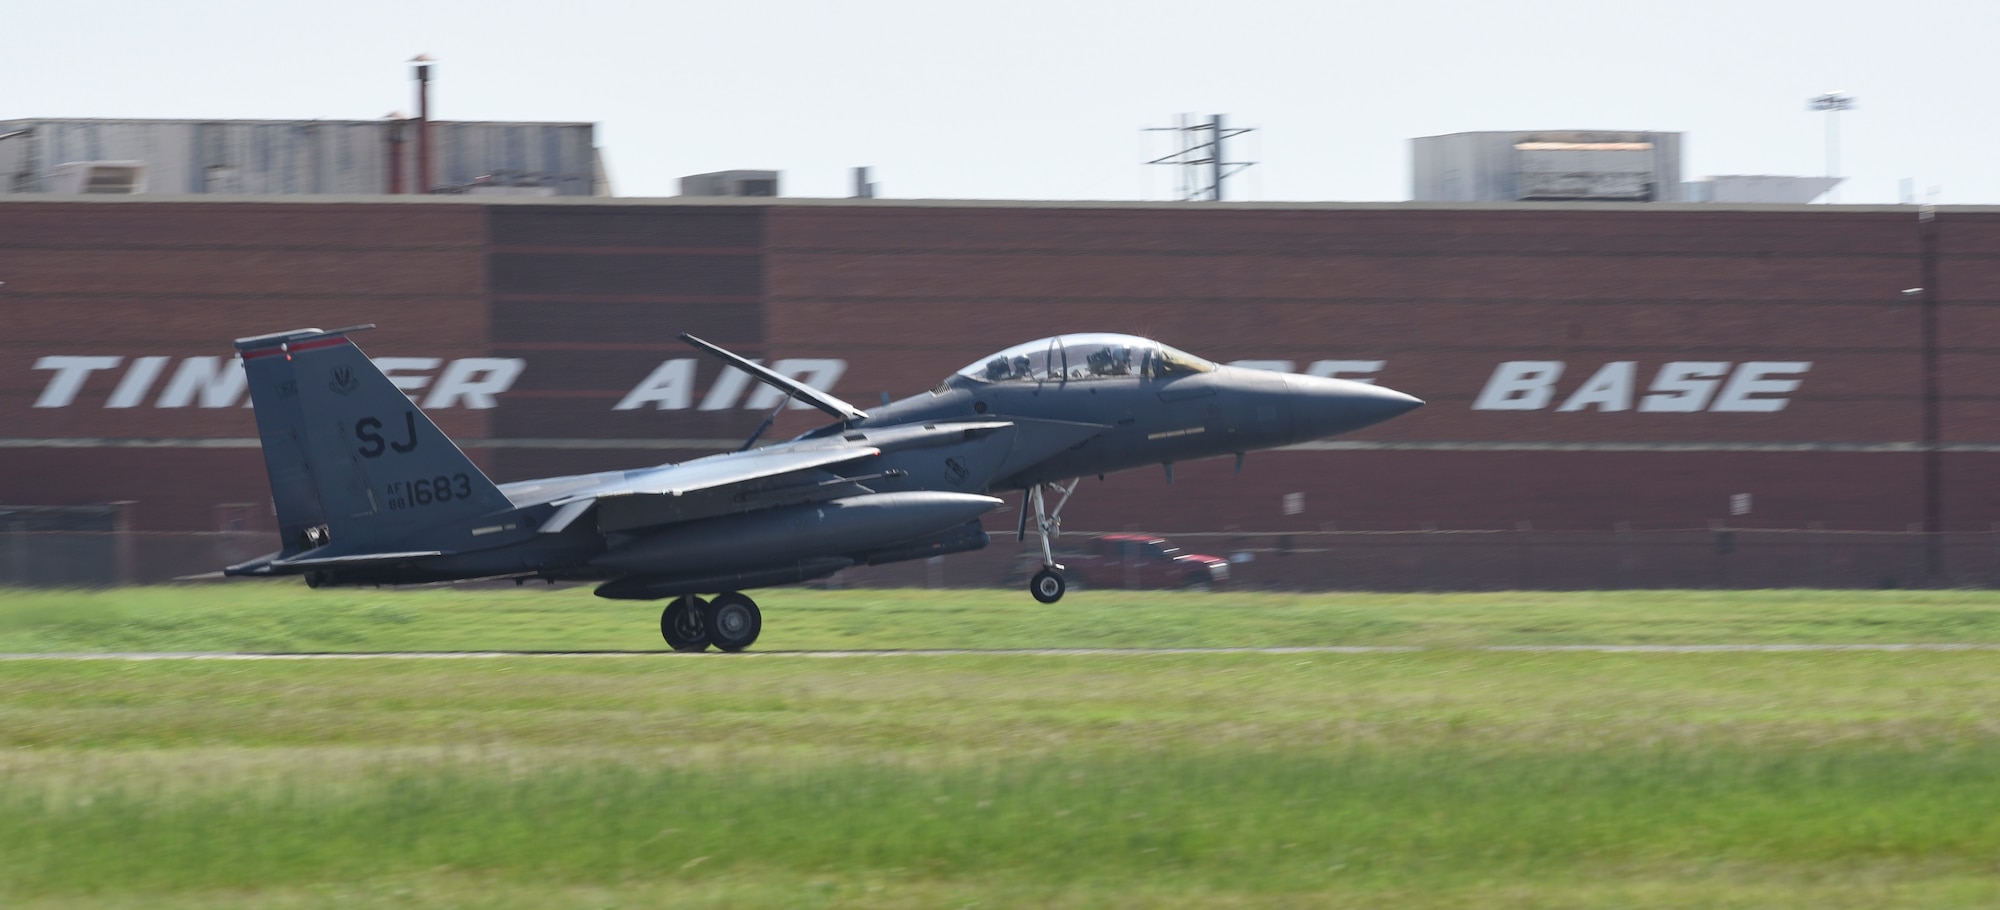 An F-15E Strike Eagle aircraft from the 4th Fighter Wing, Seymour-Johnson Air Force Base, North Carolina, lands with its airbrake deployed at Tinker AFB, Oklahoma as part of a mass-relocation of vulnerable aircraft to escape Hurricane Dorian's path Sept. 4, 2019, Tinker AFB, Oklahoma. Team Tinker executed an existing agreement with Seymour-Johnson AFB, North Carolina and Warner-Robins AFB, Georgia to host fighters, tankers and reconnaissance aircraft far away from the devastating hurricane currently impacting the East Coast of the United States. (U.S. Air Force photo/Greg L. Davis)